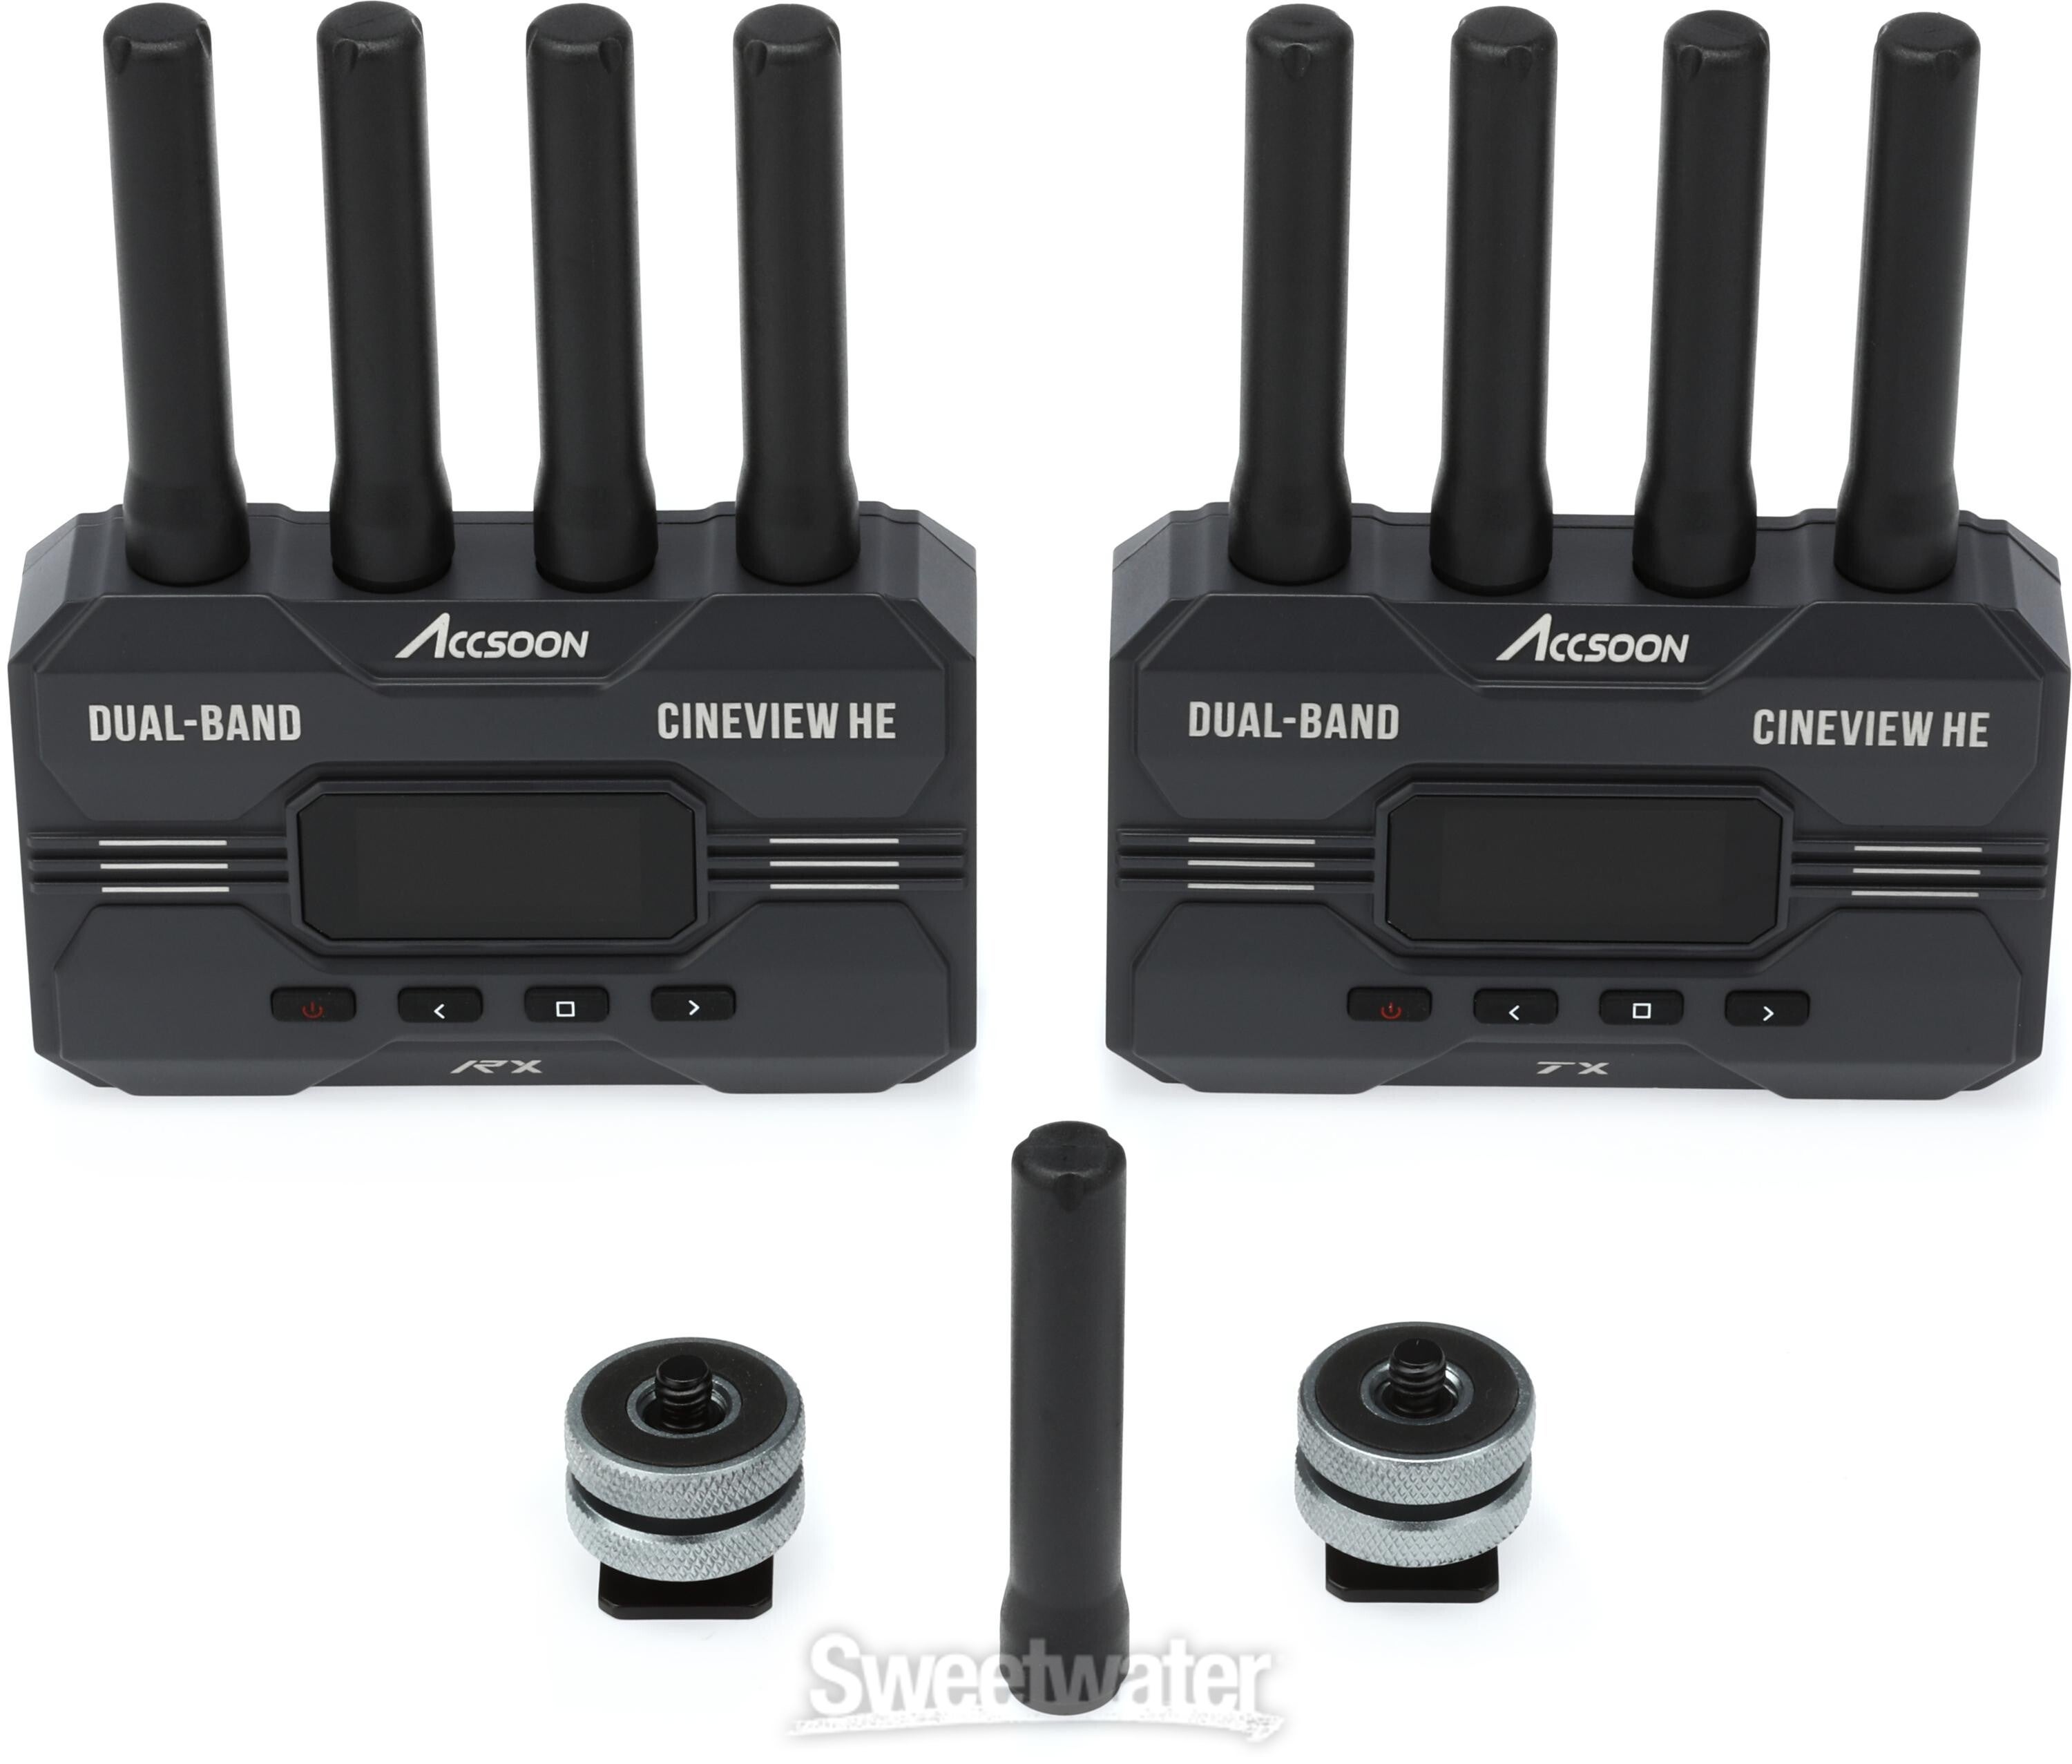 Accsoon CineView HE Multi-spectrum Wireless Video Transmitter and Receiver